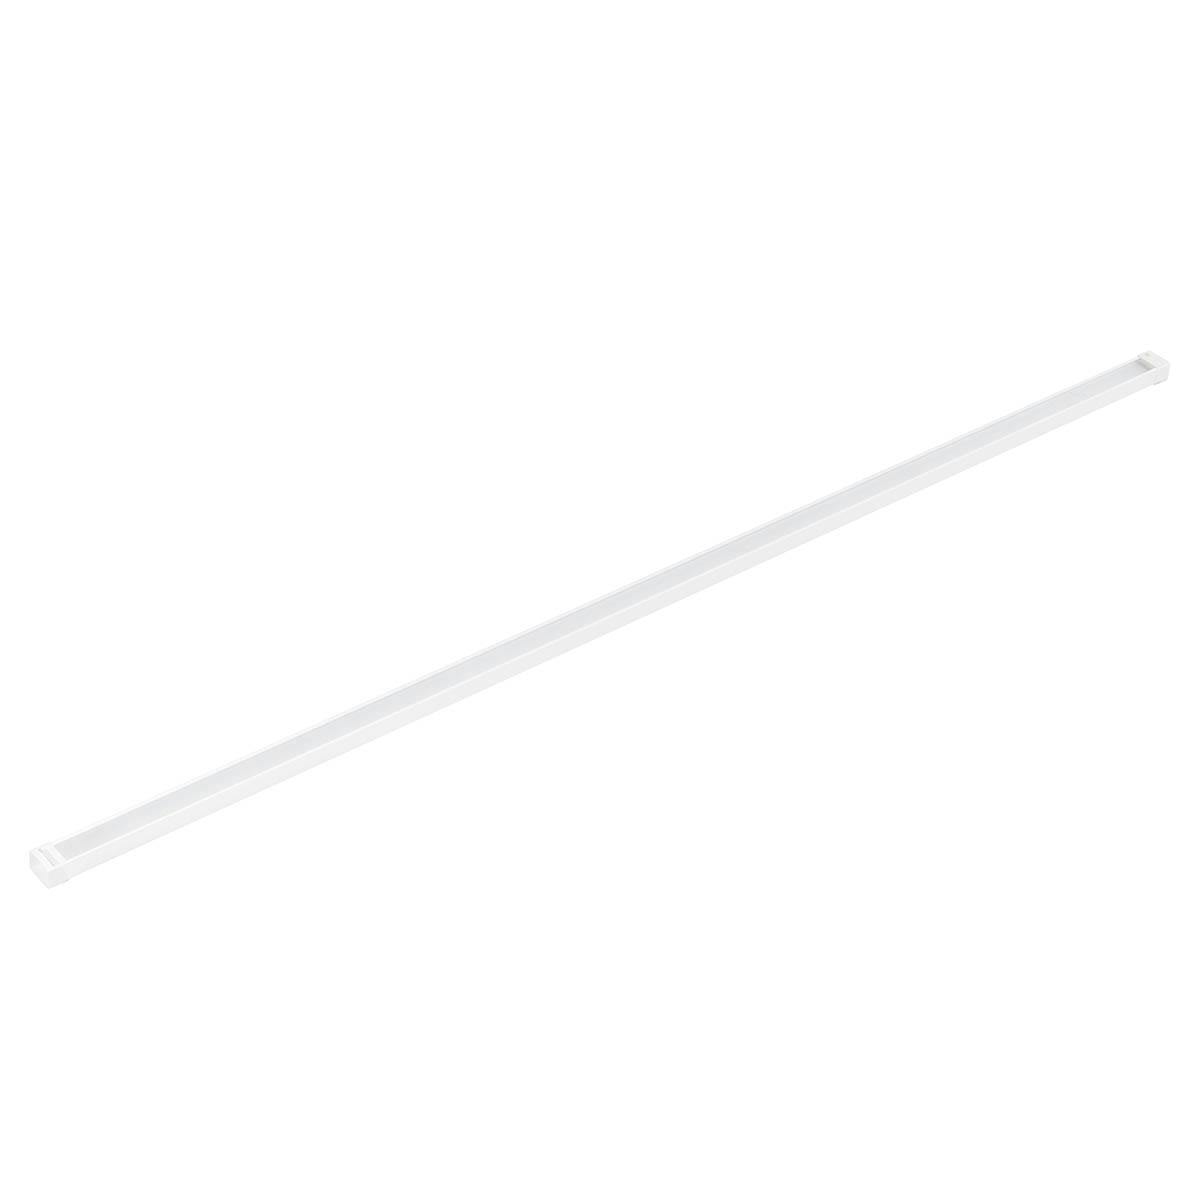 36" LED U Channel Tape Light Track White on a white background